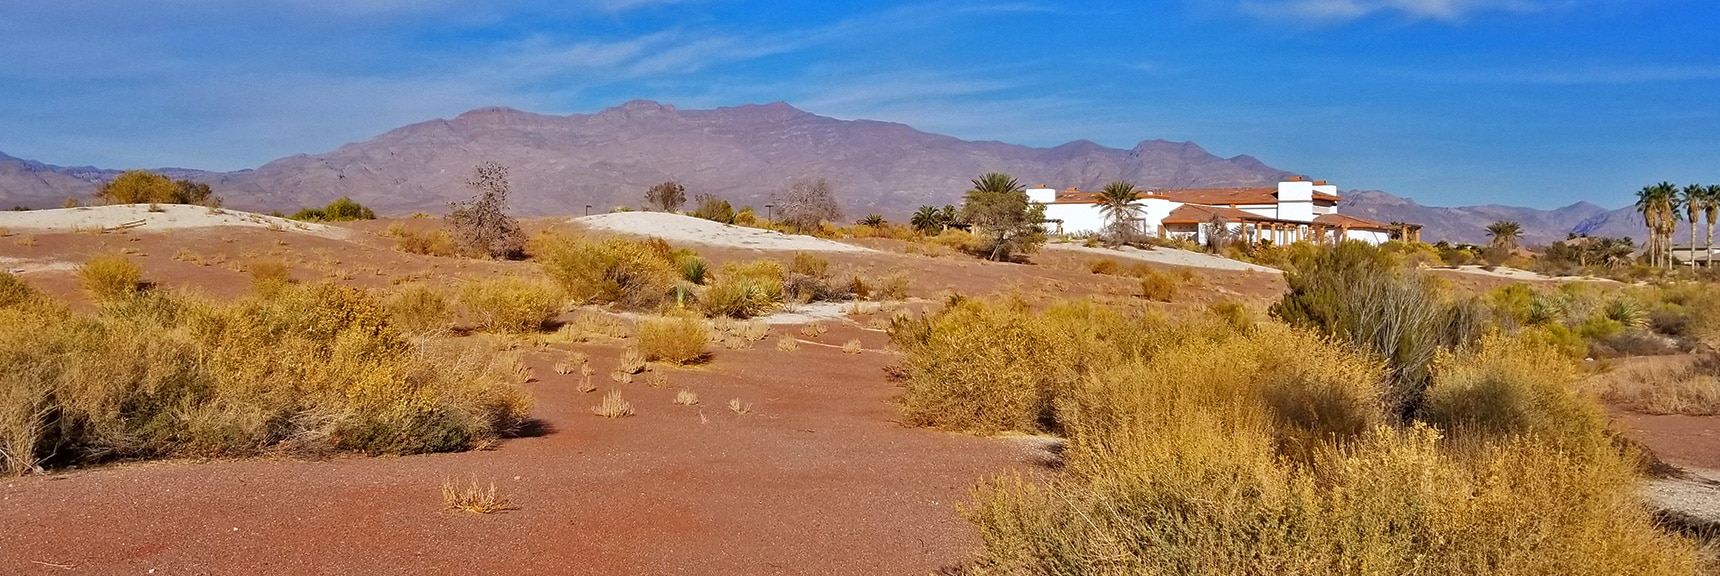 Traveling Through the Abandoned 27-Hole Silverstone Golf Course, Gass Peak in Background. | Snapshot of Las Vegas Northern Growth Edge on January 3, 2021